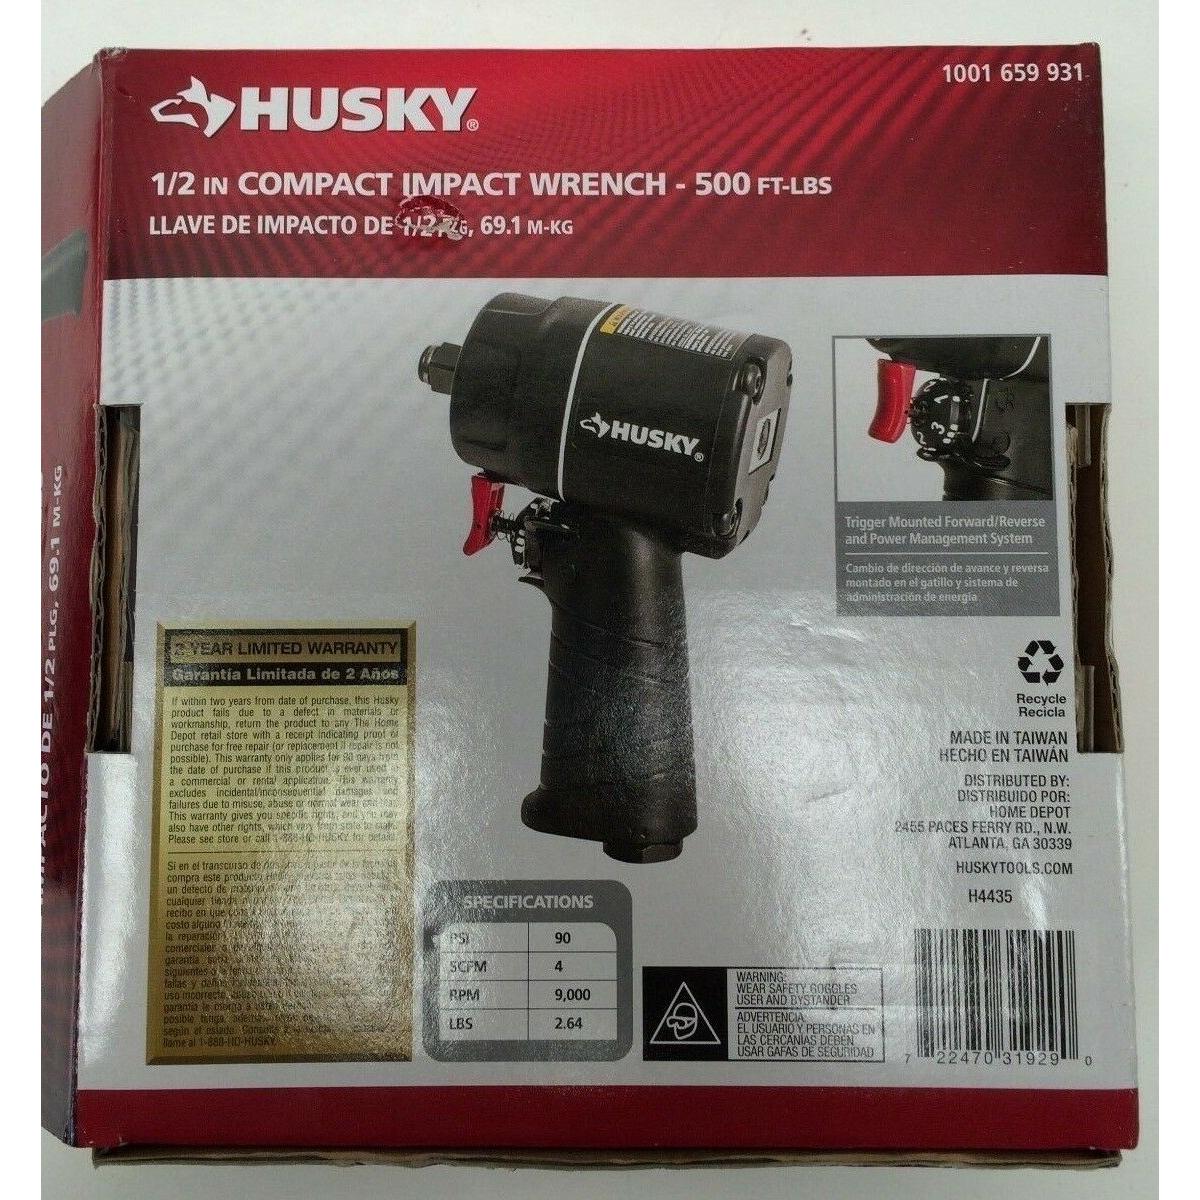 Impact Wrench 500 ft.-lbs. Husky 1/2 in 